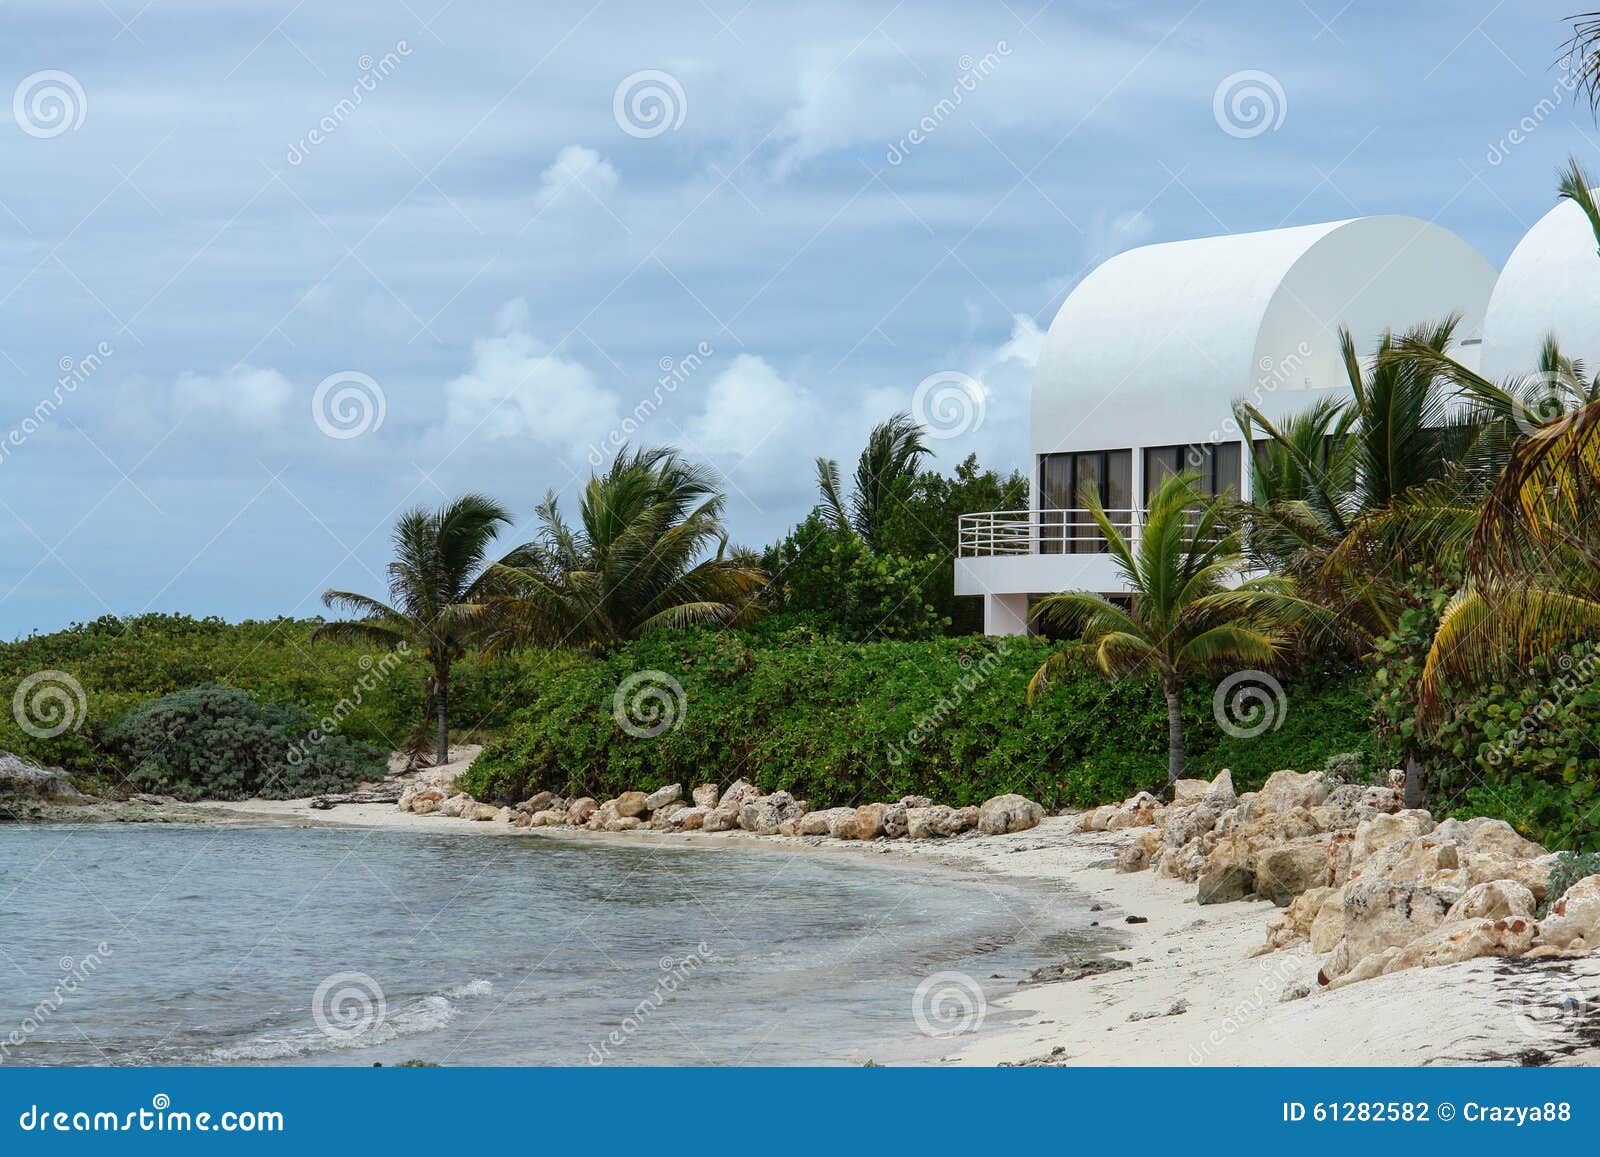 covecastles villa on beach, shoal bay west, anguilla, british west indies, bwi, caribbean